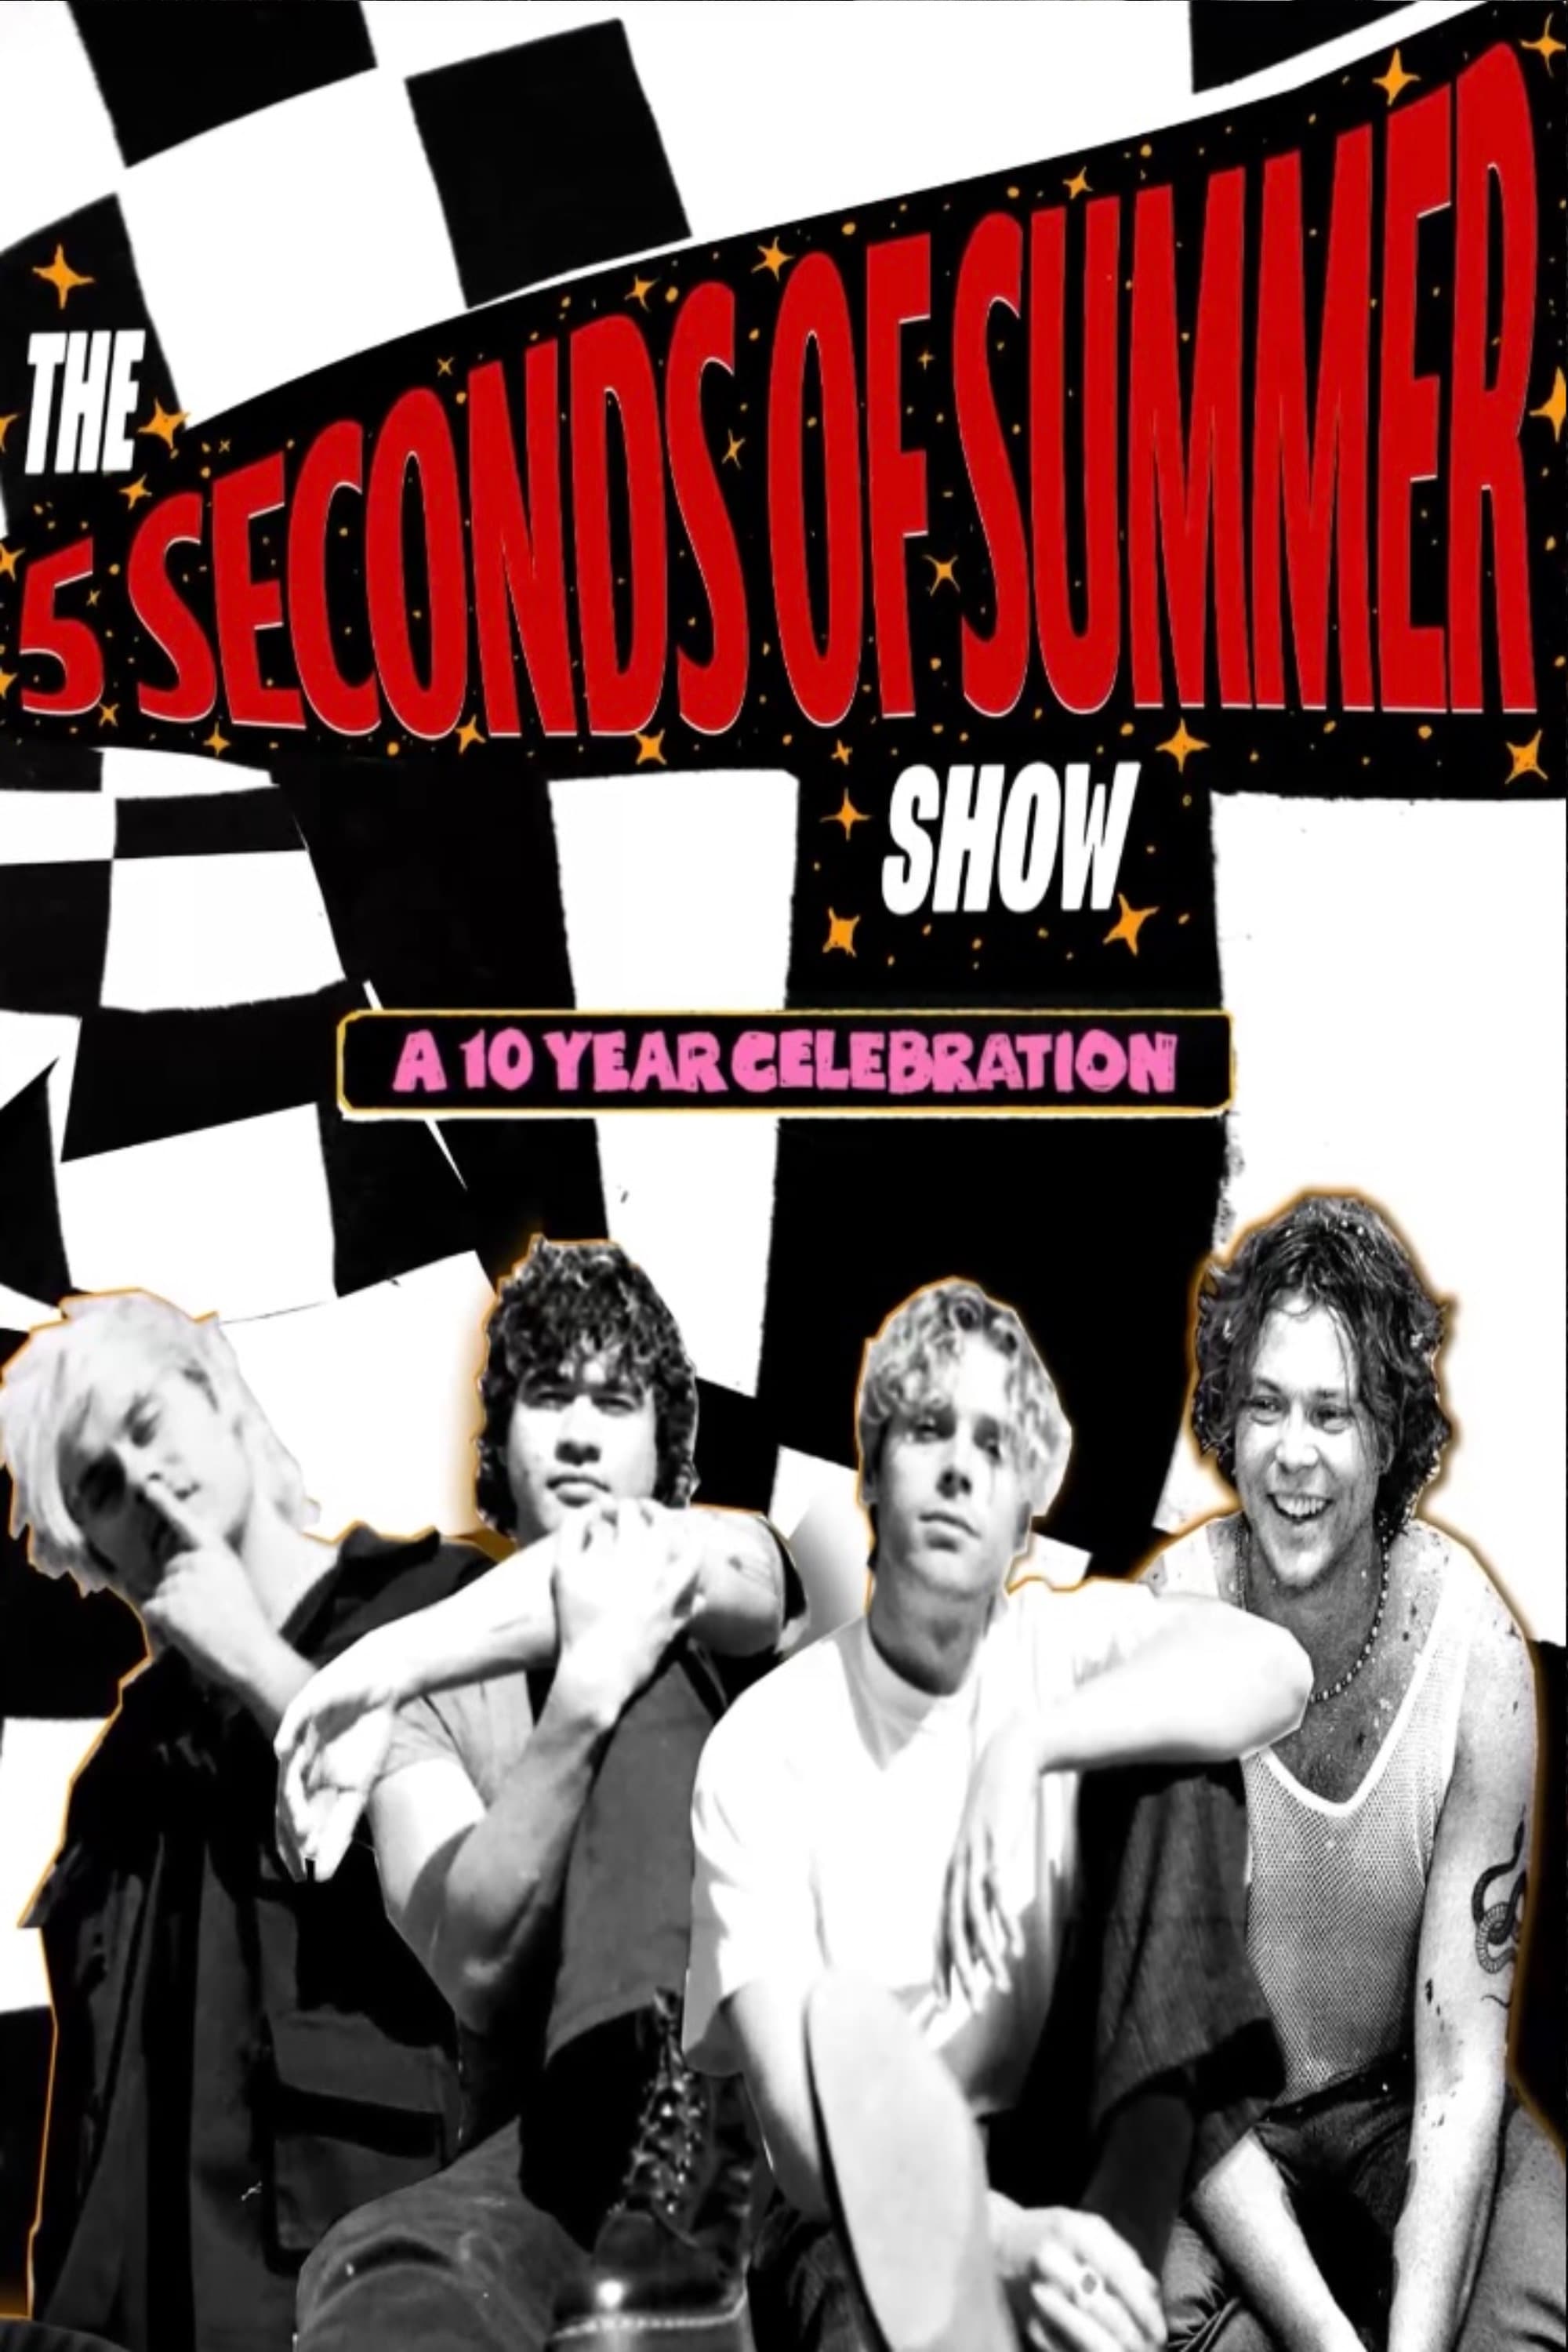 The 5 Seconds of Summer Show